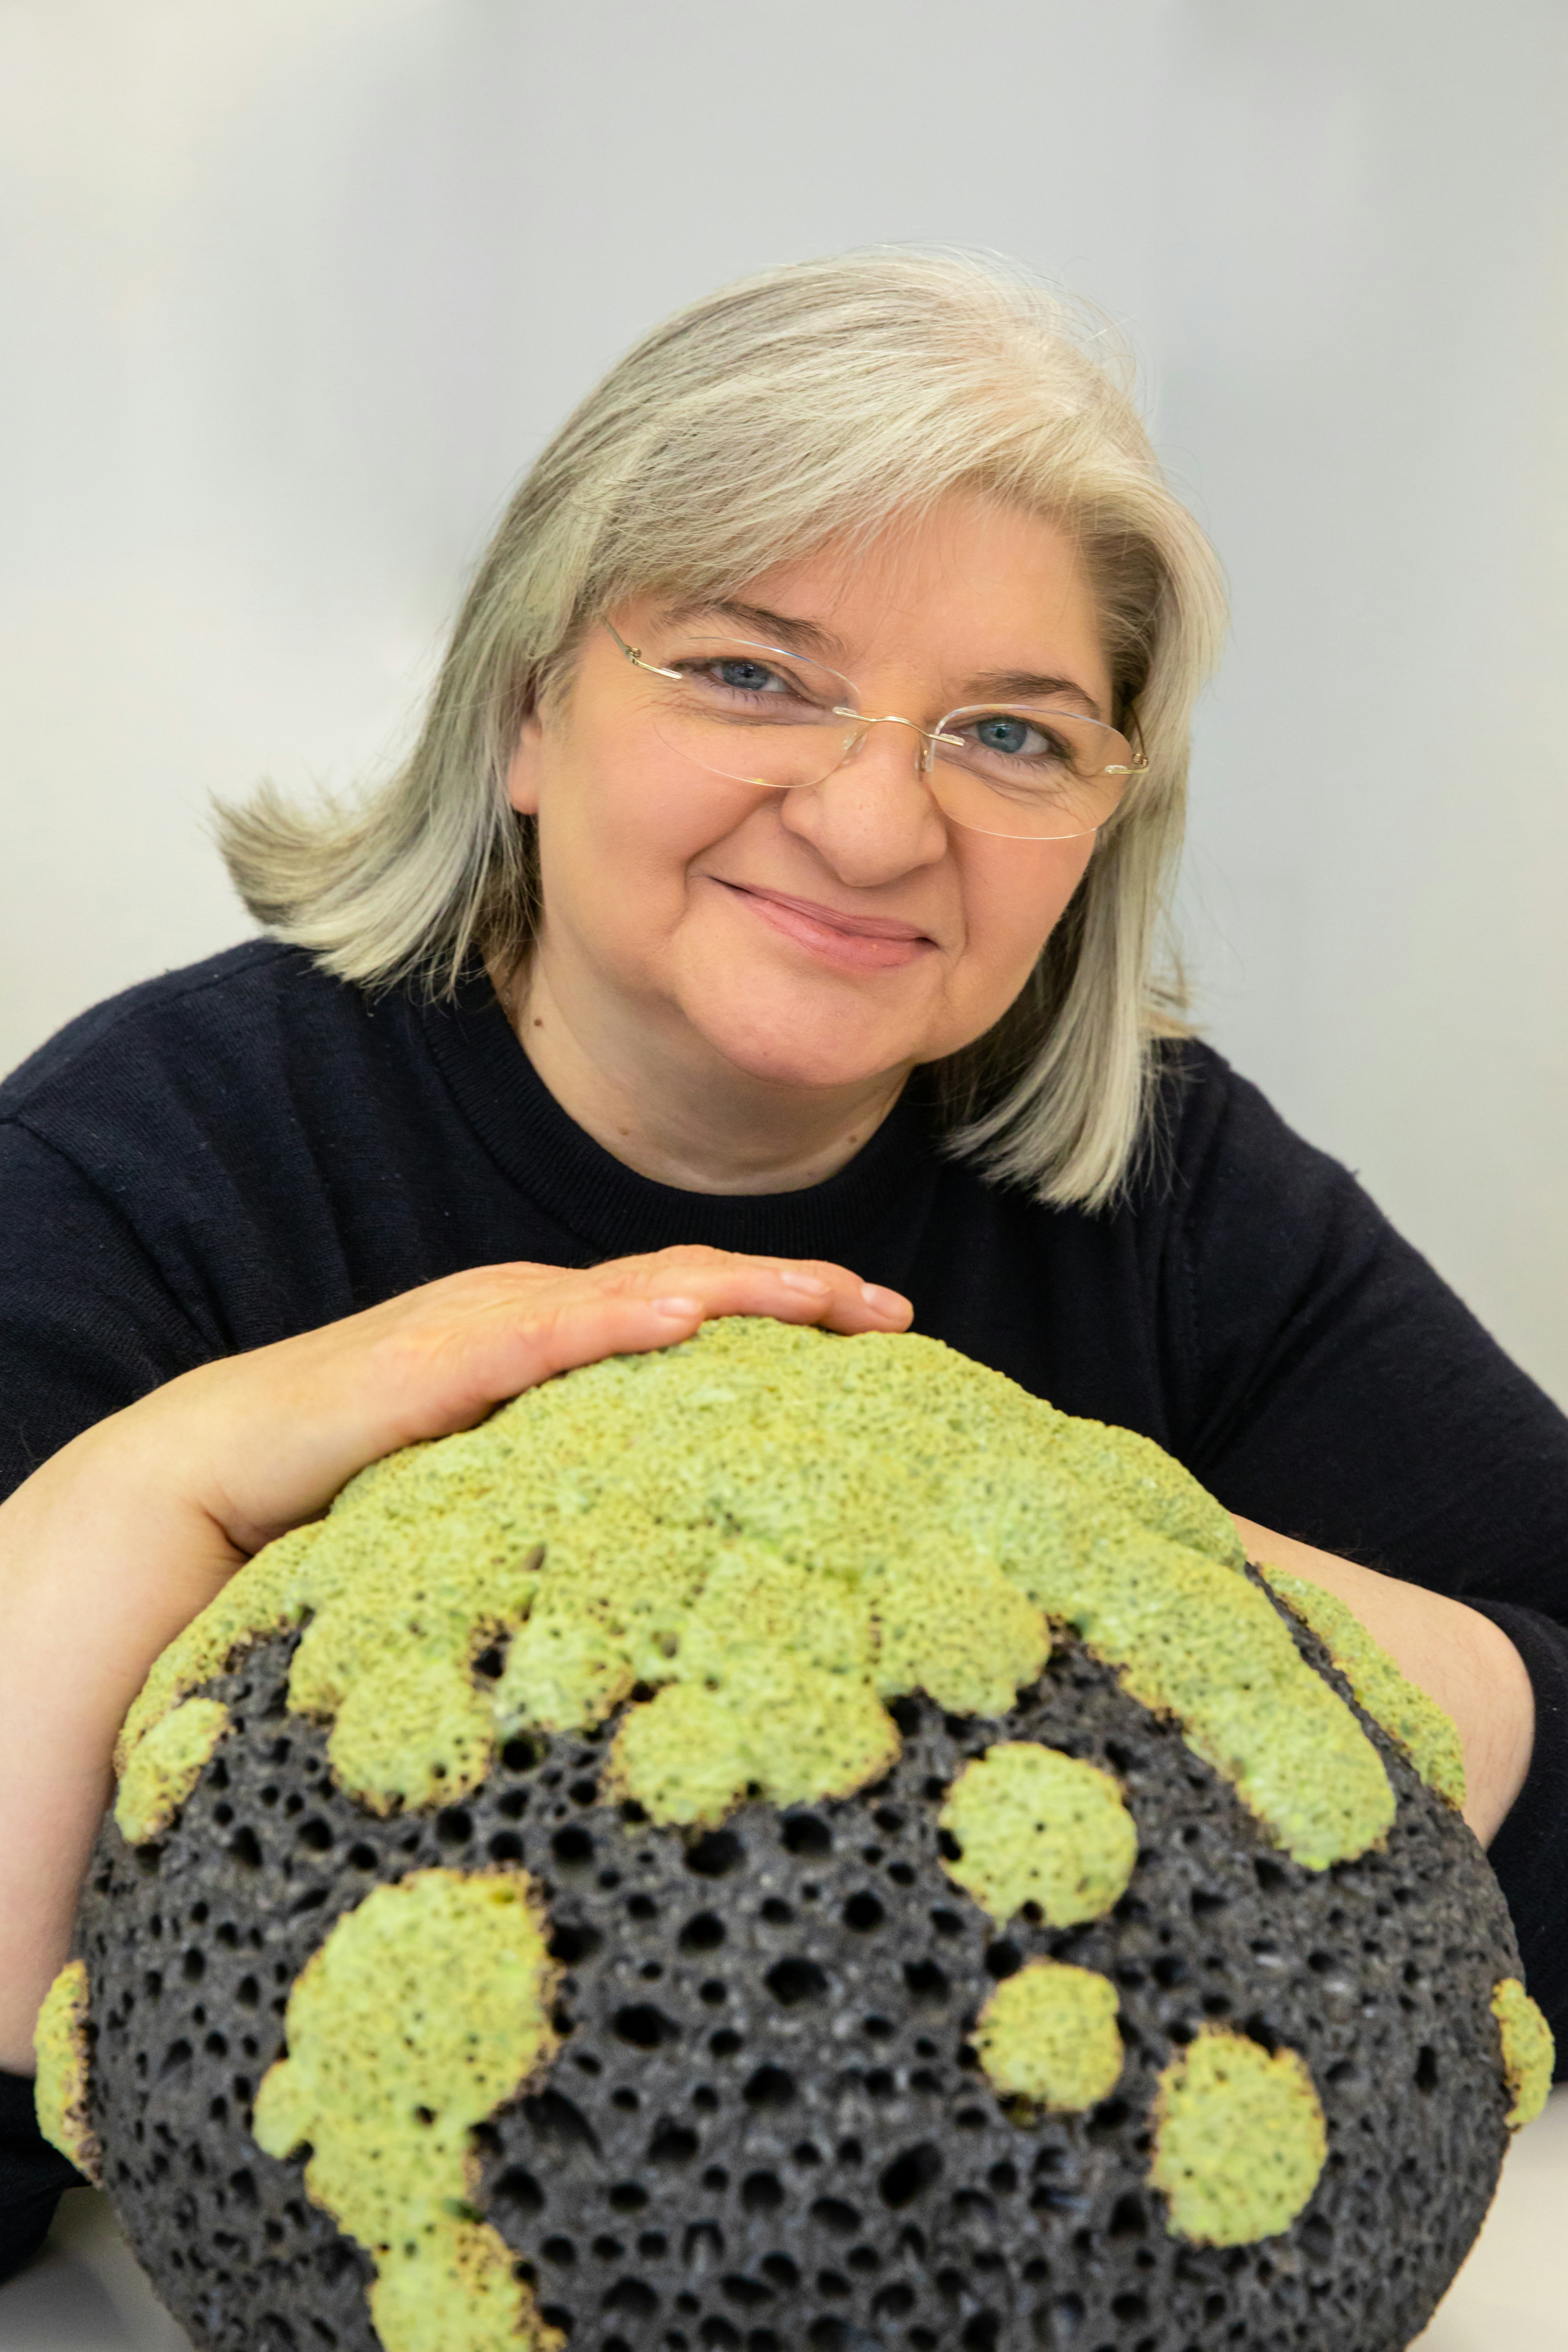 SVETLANA LANA MATUSA academic painter and ceramic artist
The artist is deeply inspired by Icelandic nature and landscape, the texture and shapes of lava, moss, ice, geothermal landscape. Ceramic sculptures known as lava moss stones.